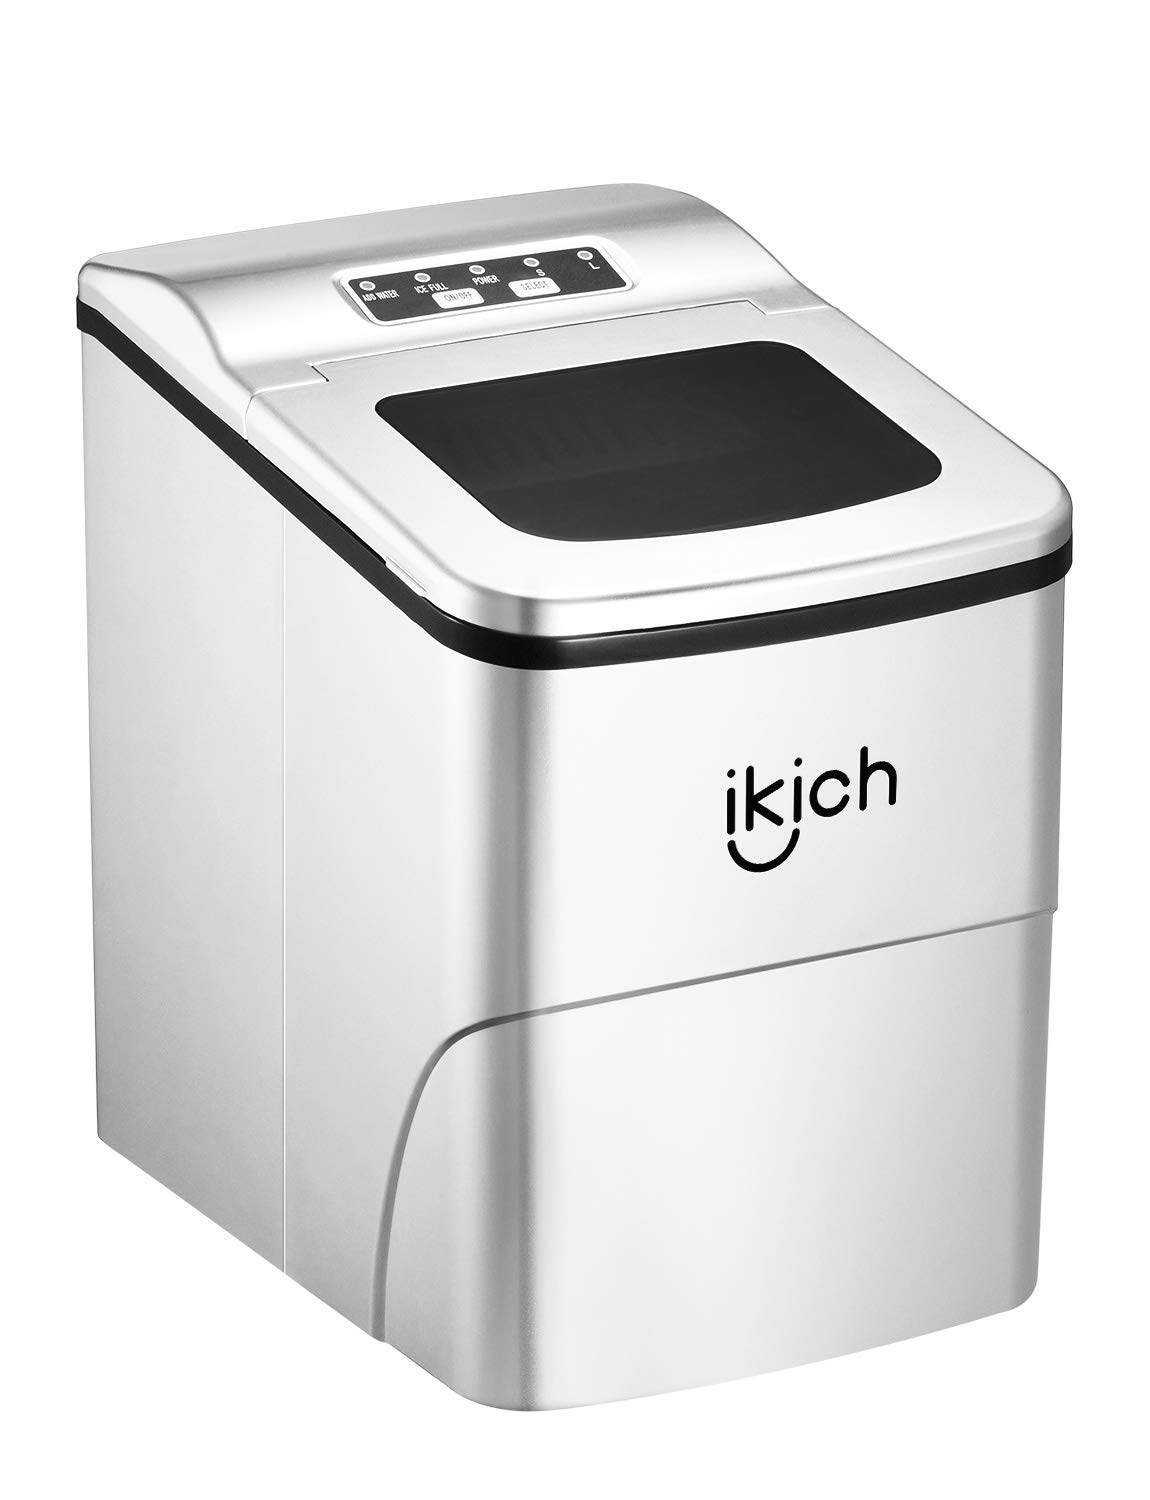 IKICH Portable Countertop LED Display Ice Maker Machine With Ice Scoop And Basket